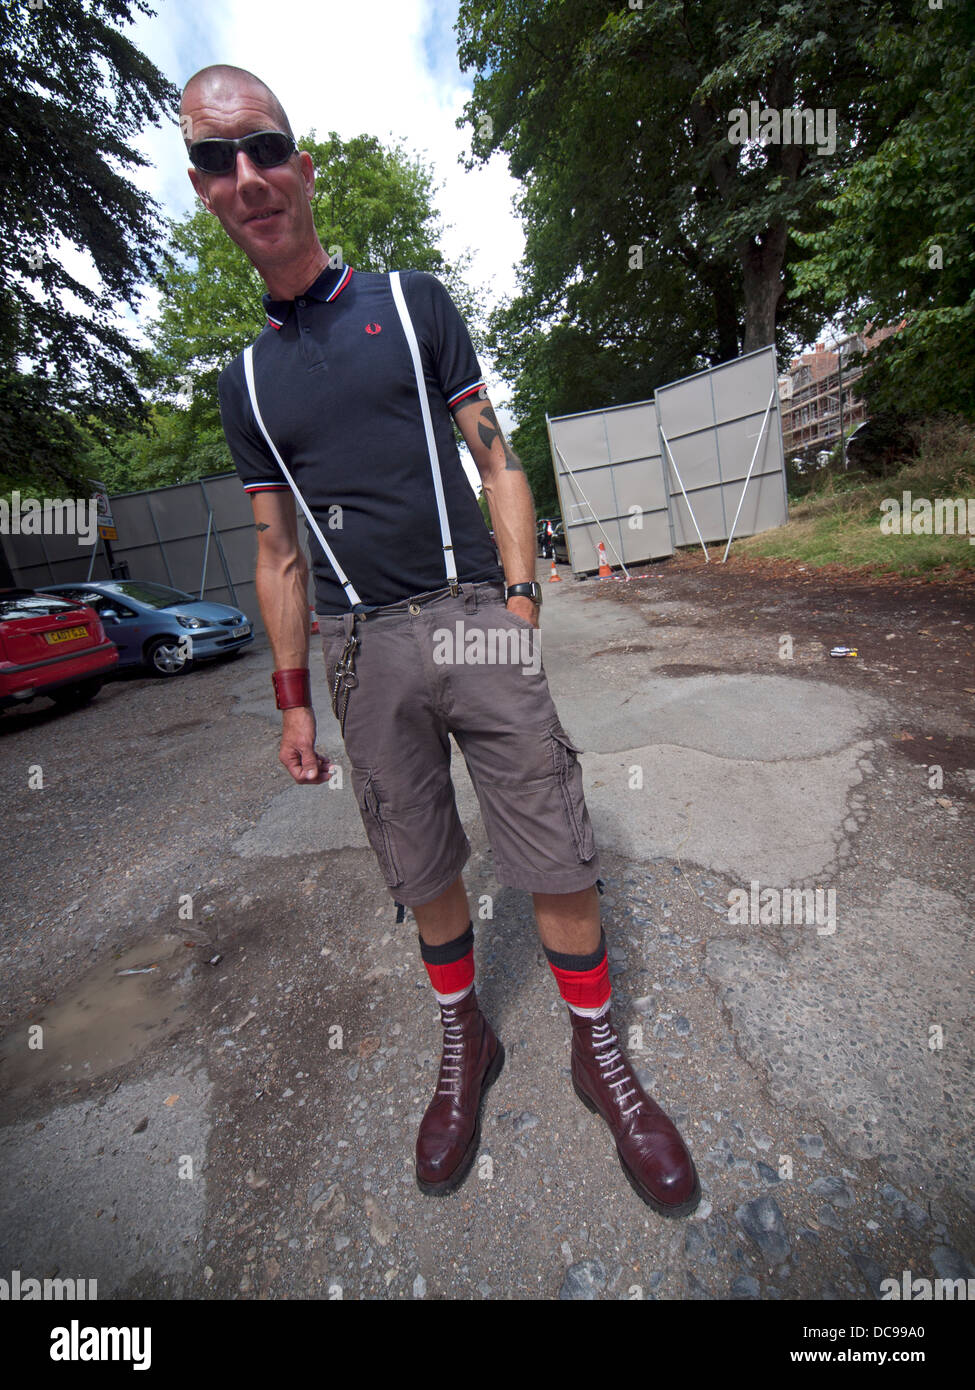 Skinhead Boots High Resolution Stock Photography and Images - Alamy